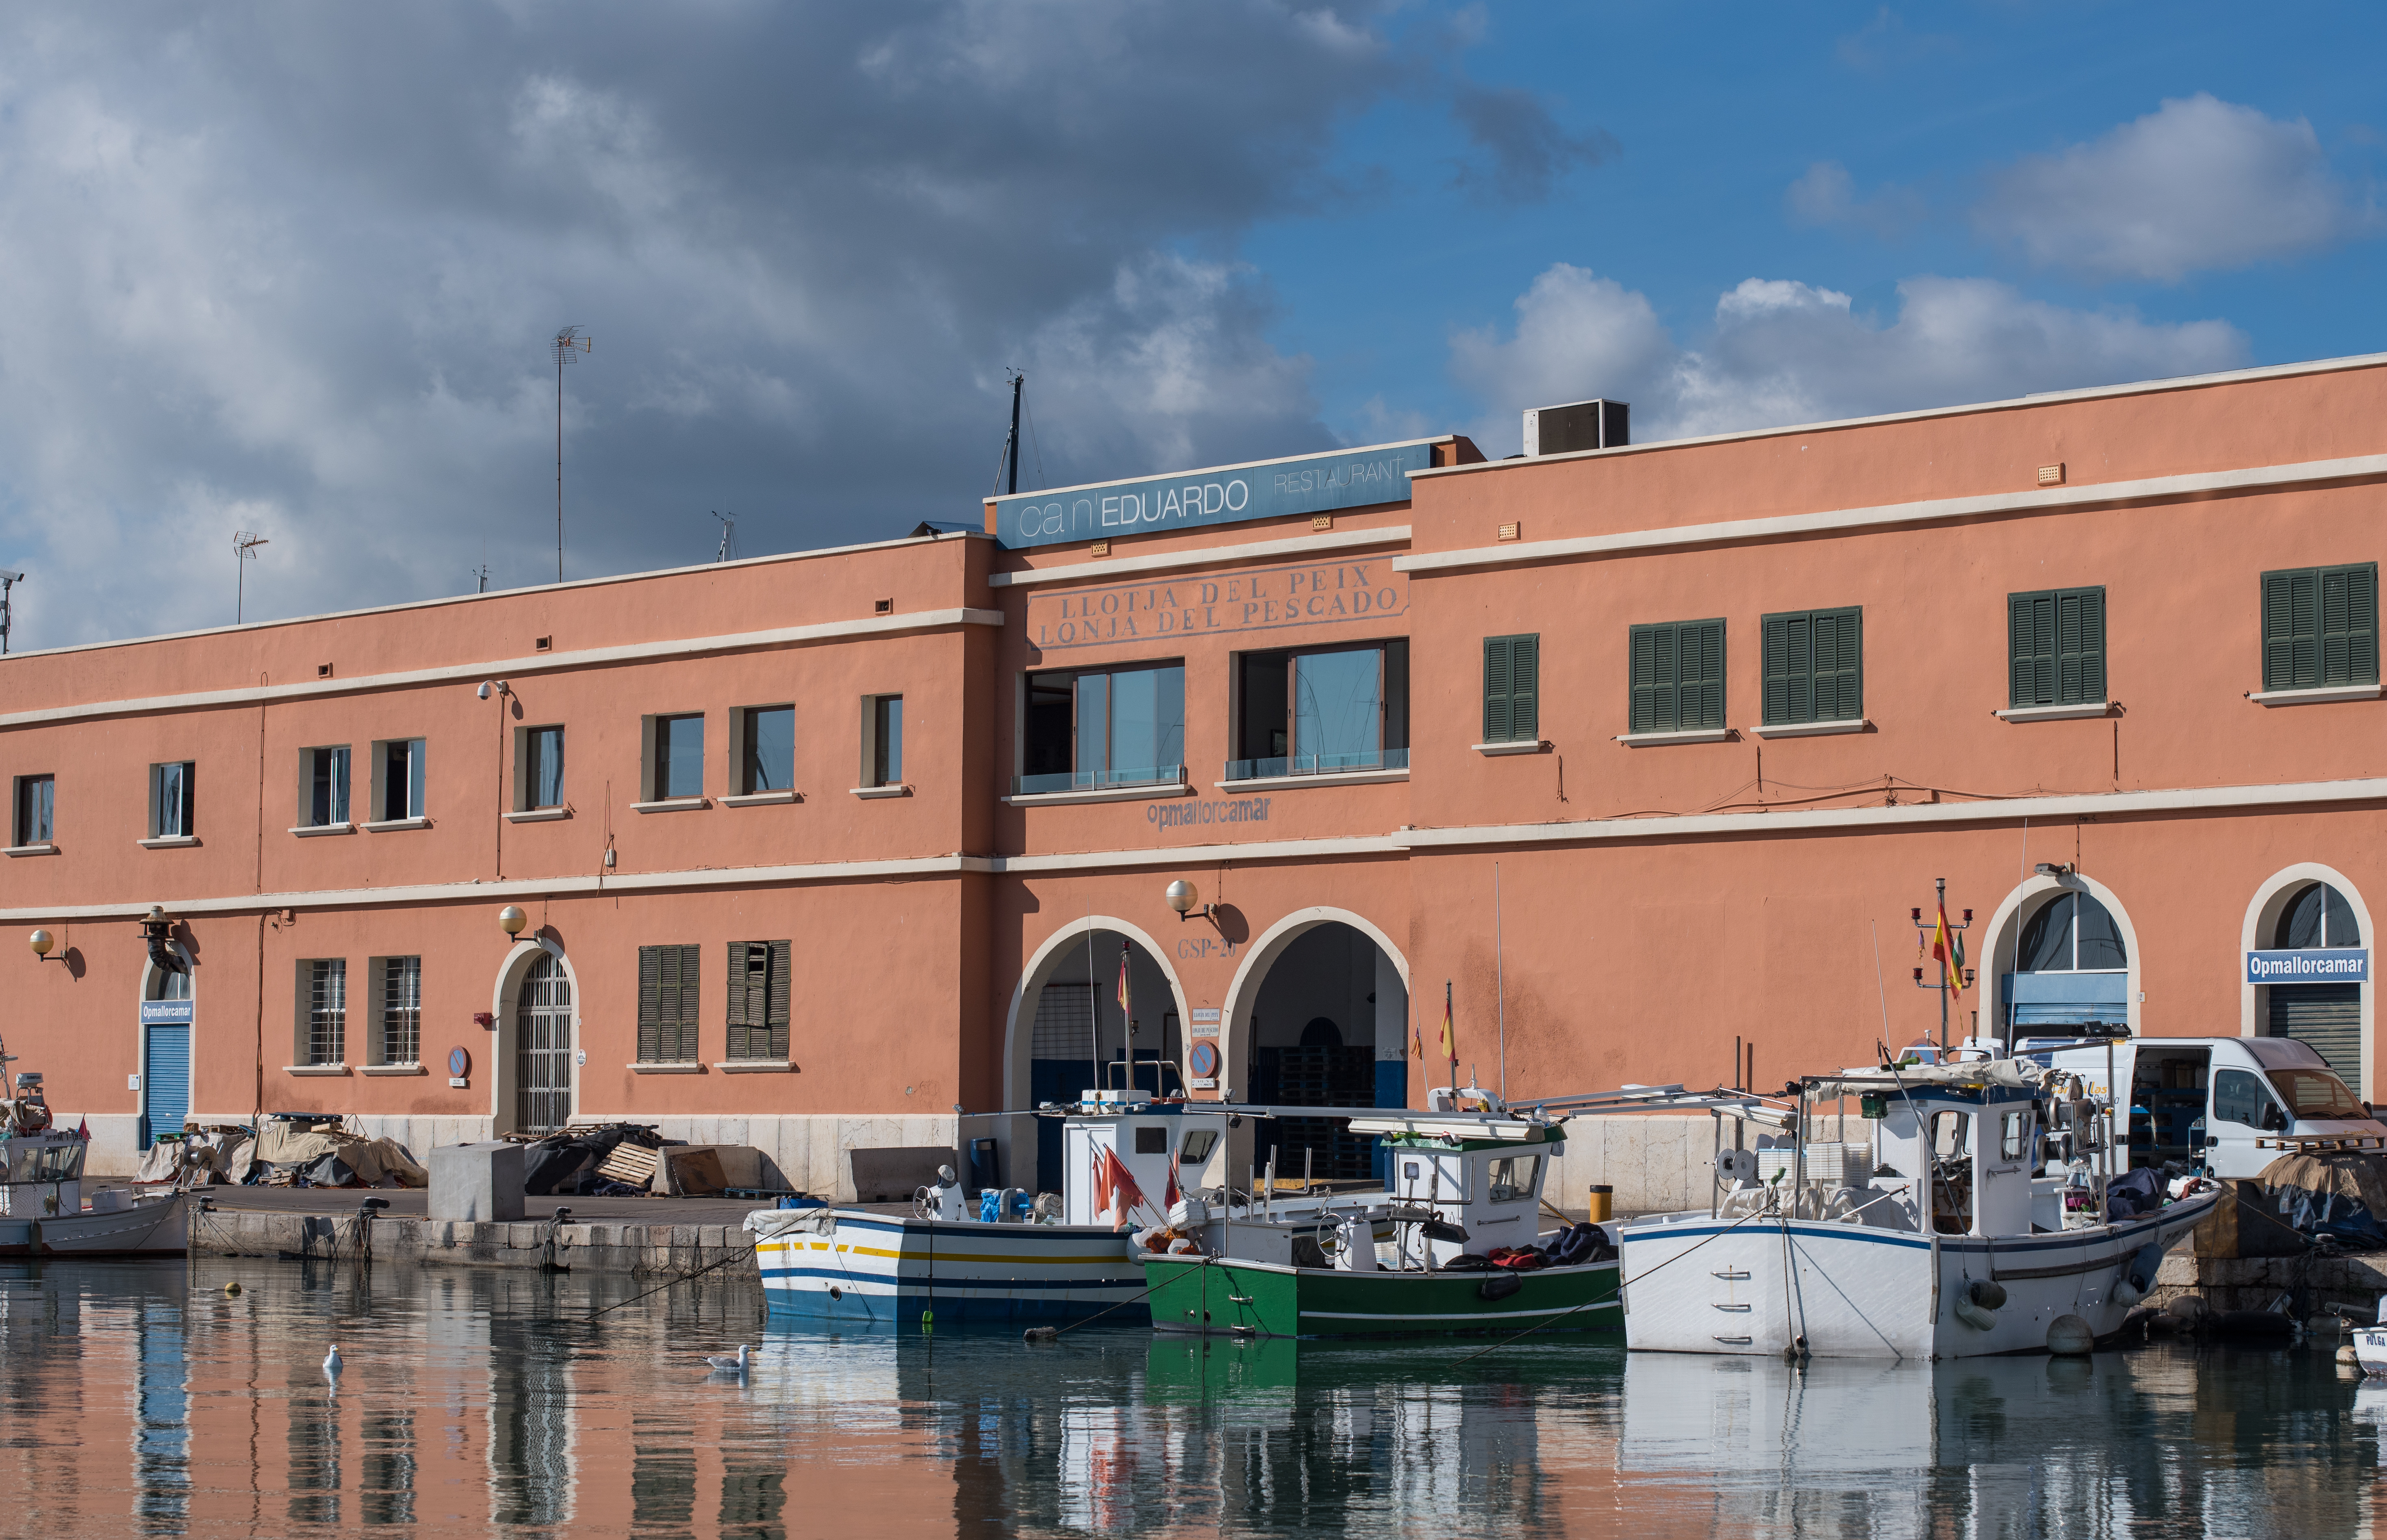 The APB launches a public tender for the commercial operation of the fish market at the Contramuelle-Mollet in the port of Palma